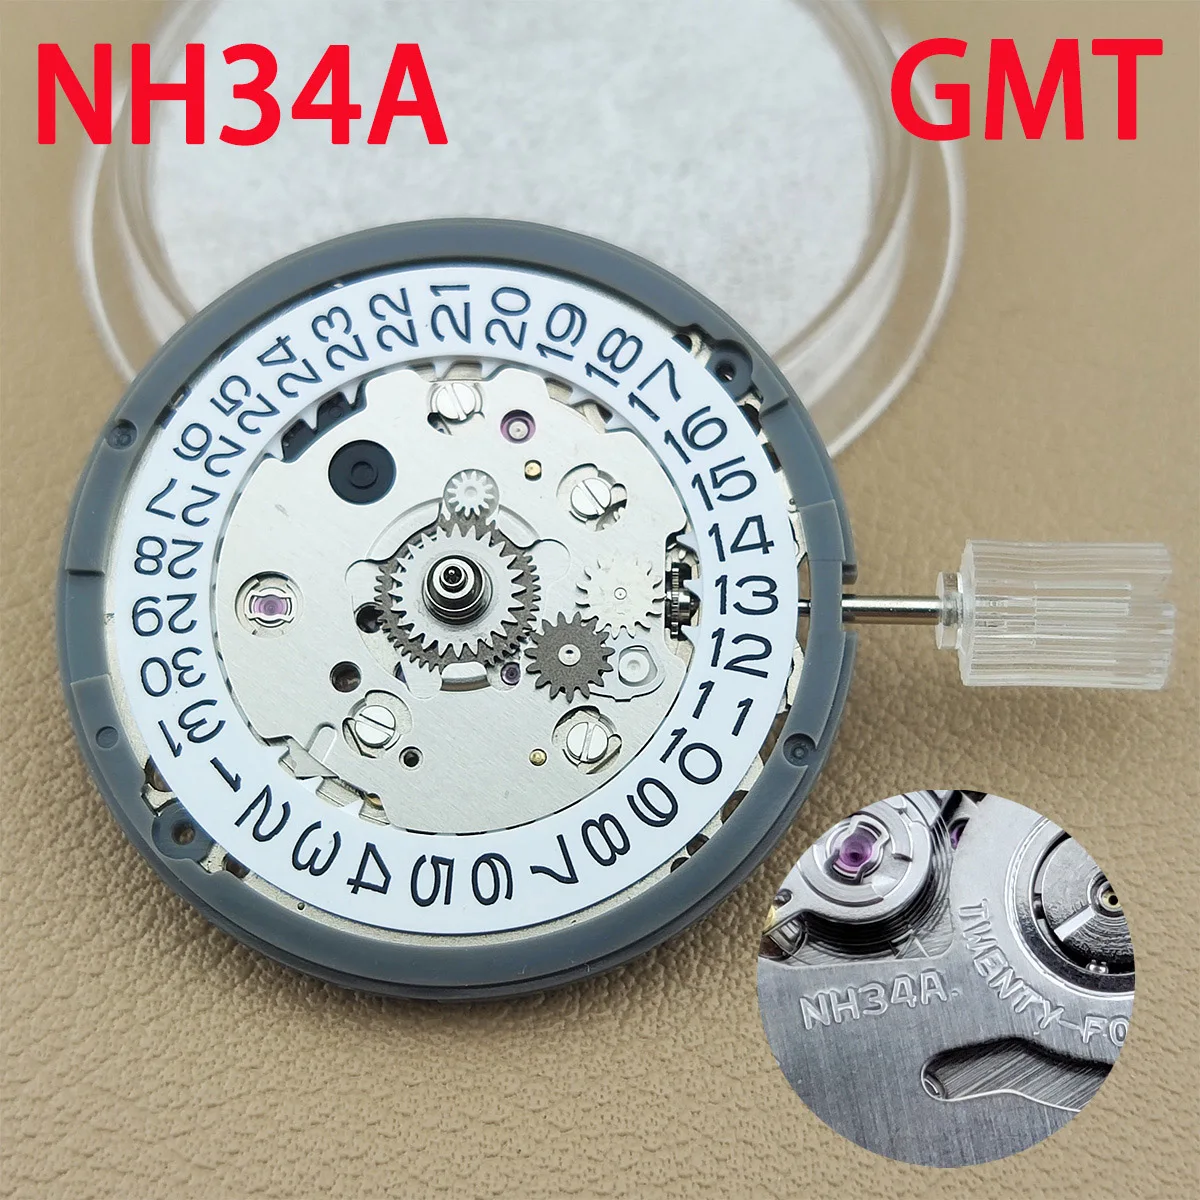 

NH34 Automatic Mechanical nh34 Movement GMT 24 Hours Hands Japan Original Parts NH34A Date at 3.0 High Accuracy Mechanism MOD